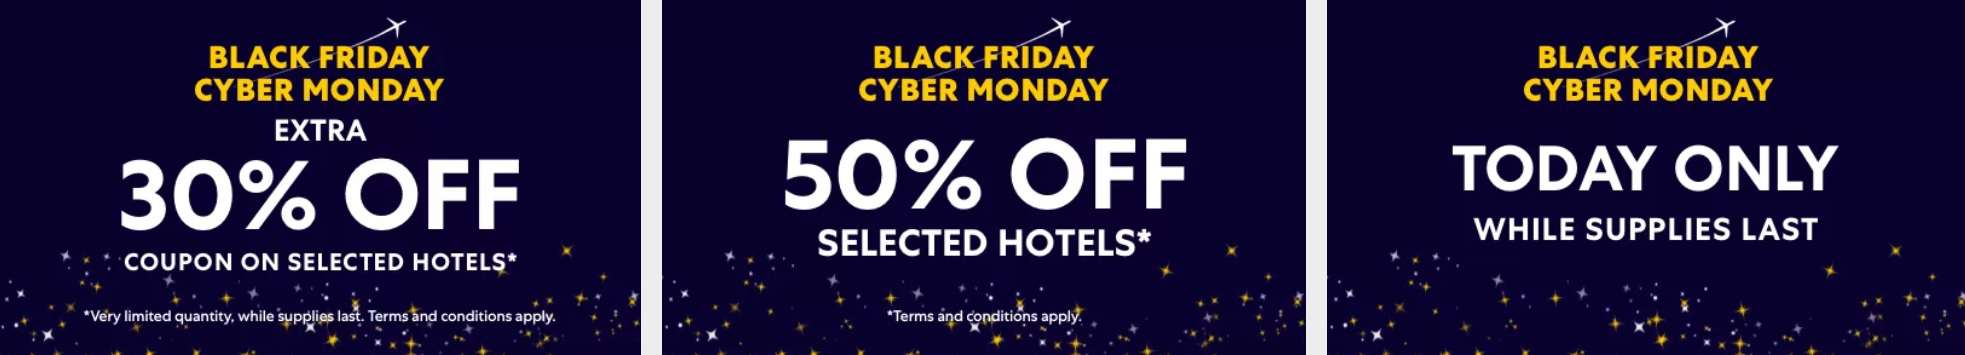 Black Friday Sale in Singapore 2019 (Plus, Cyber Monday Deals!) - Will Expedia Have Black Friday Deals